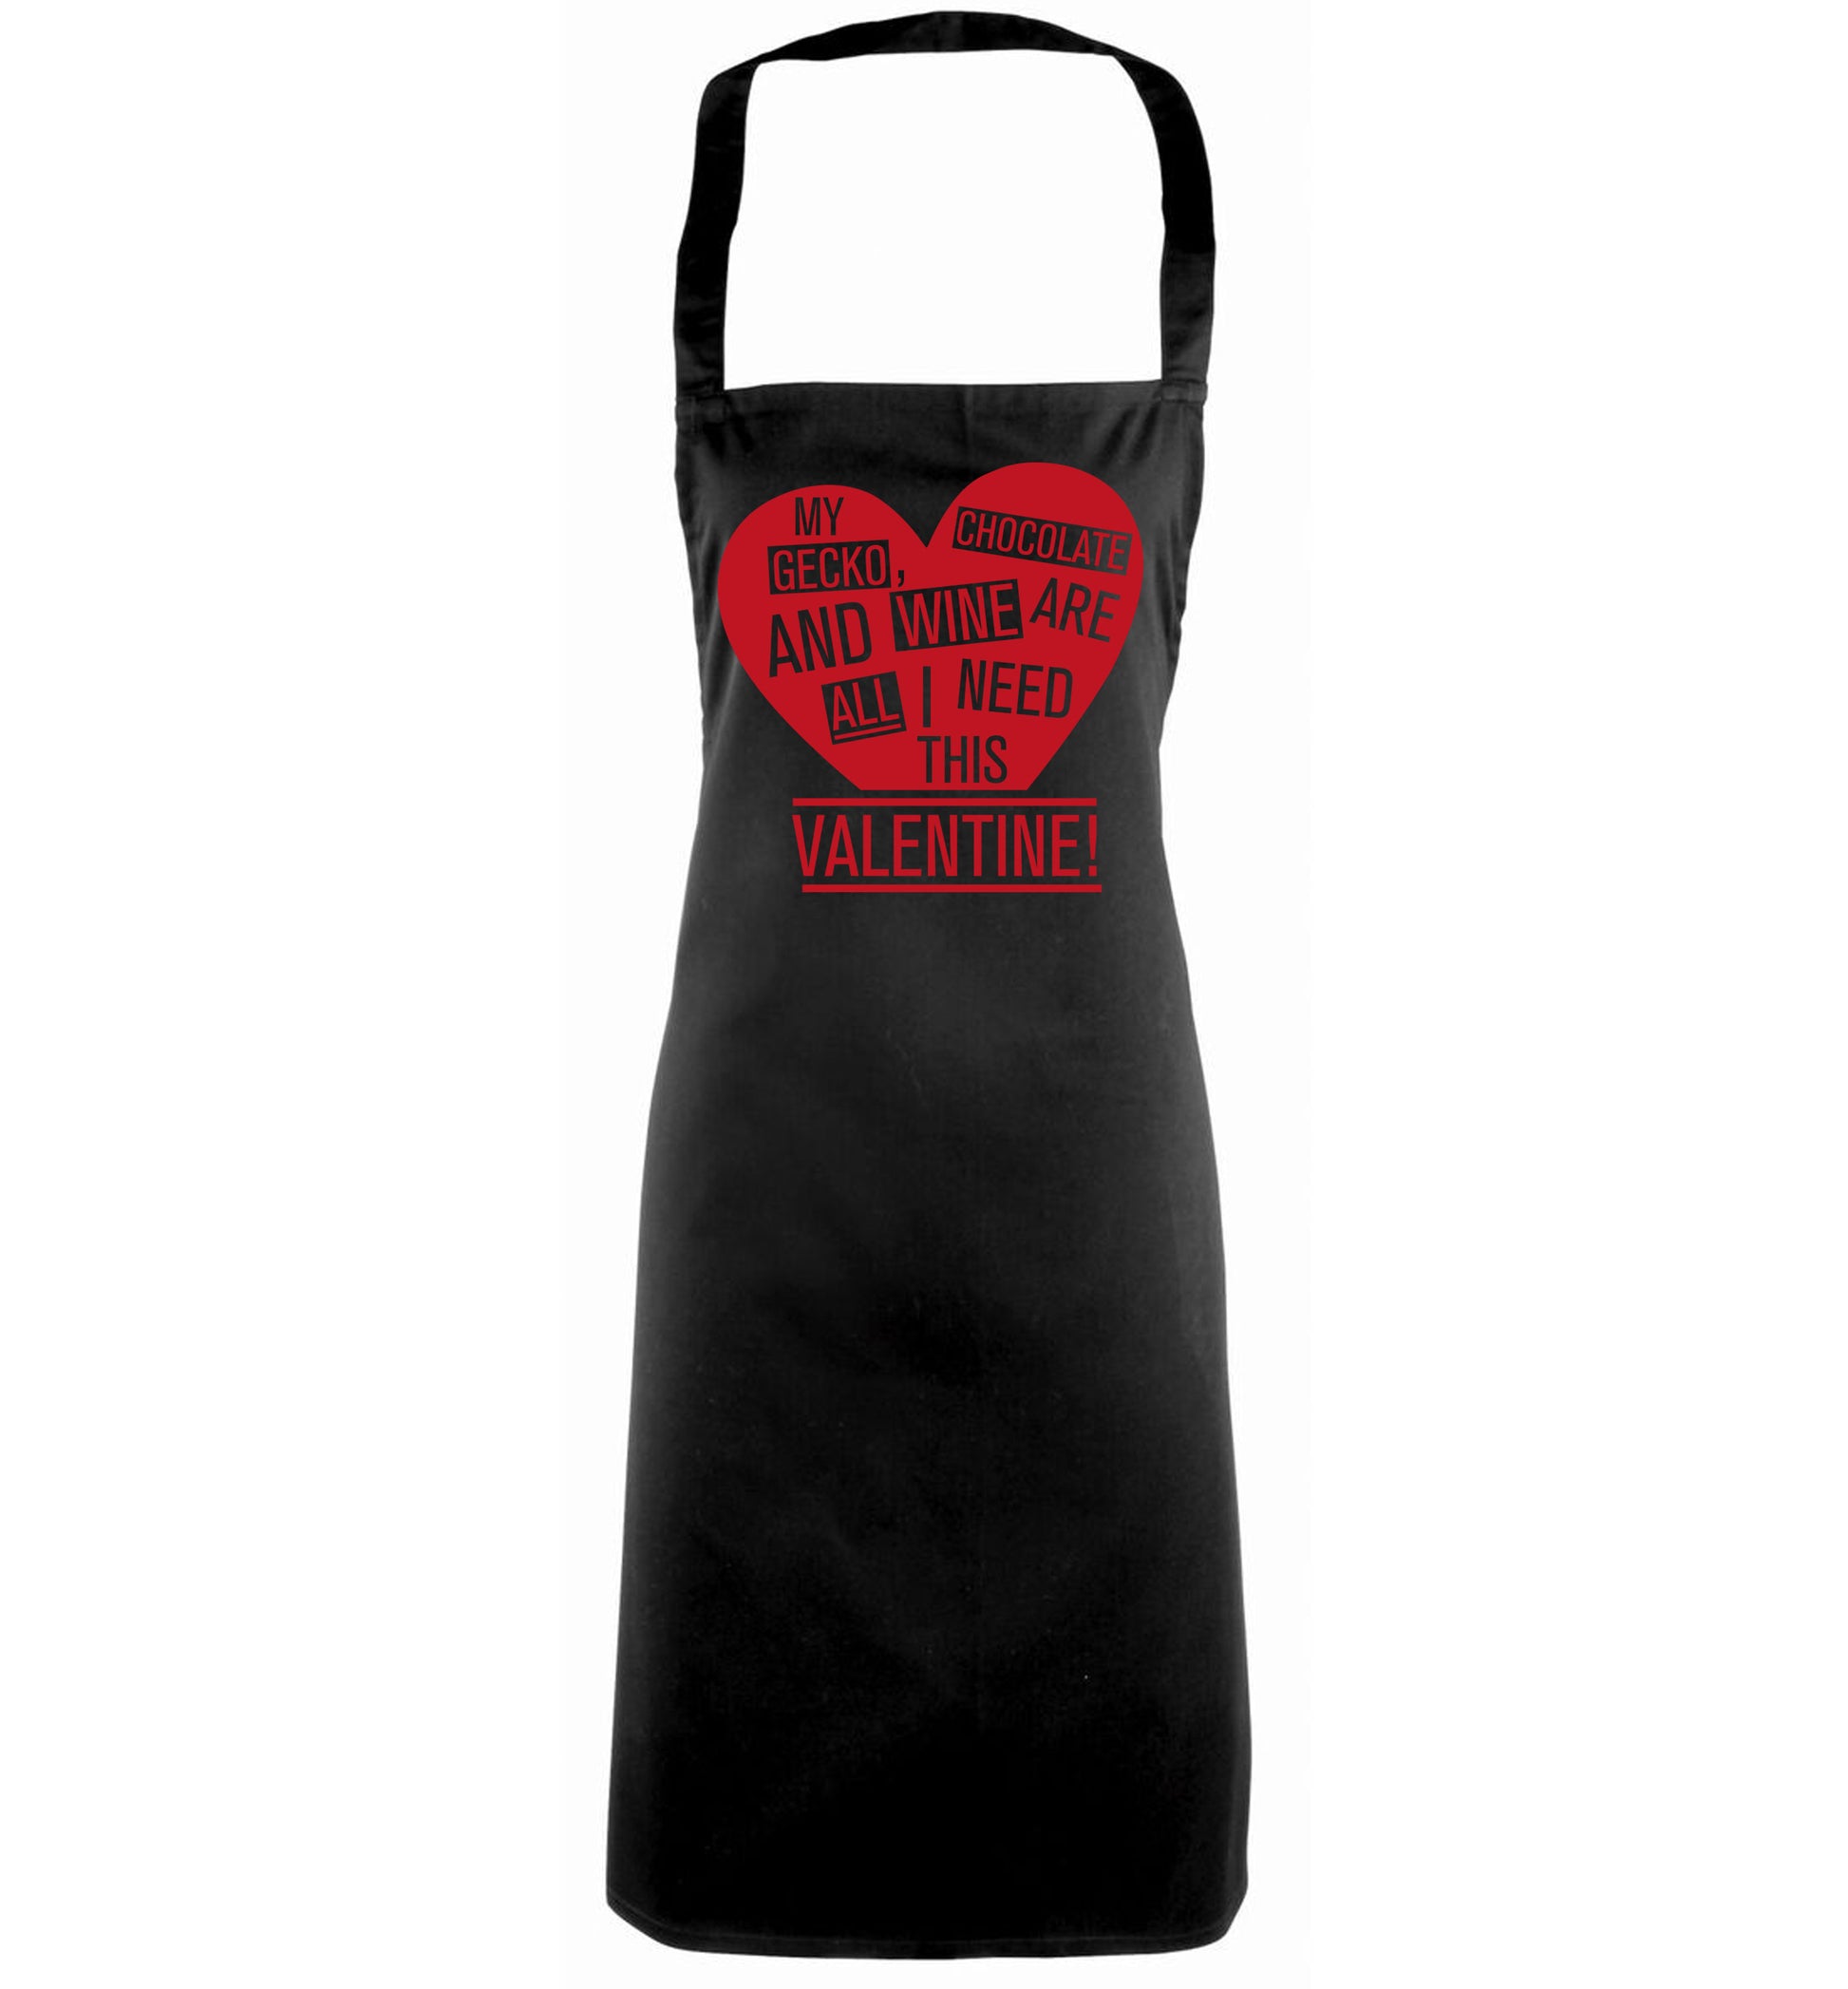 My gecko, chocolate and wine are all I need this valentine! black apron